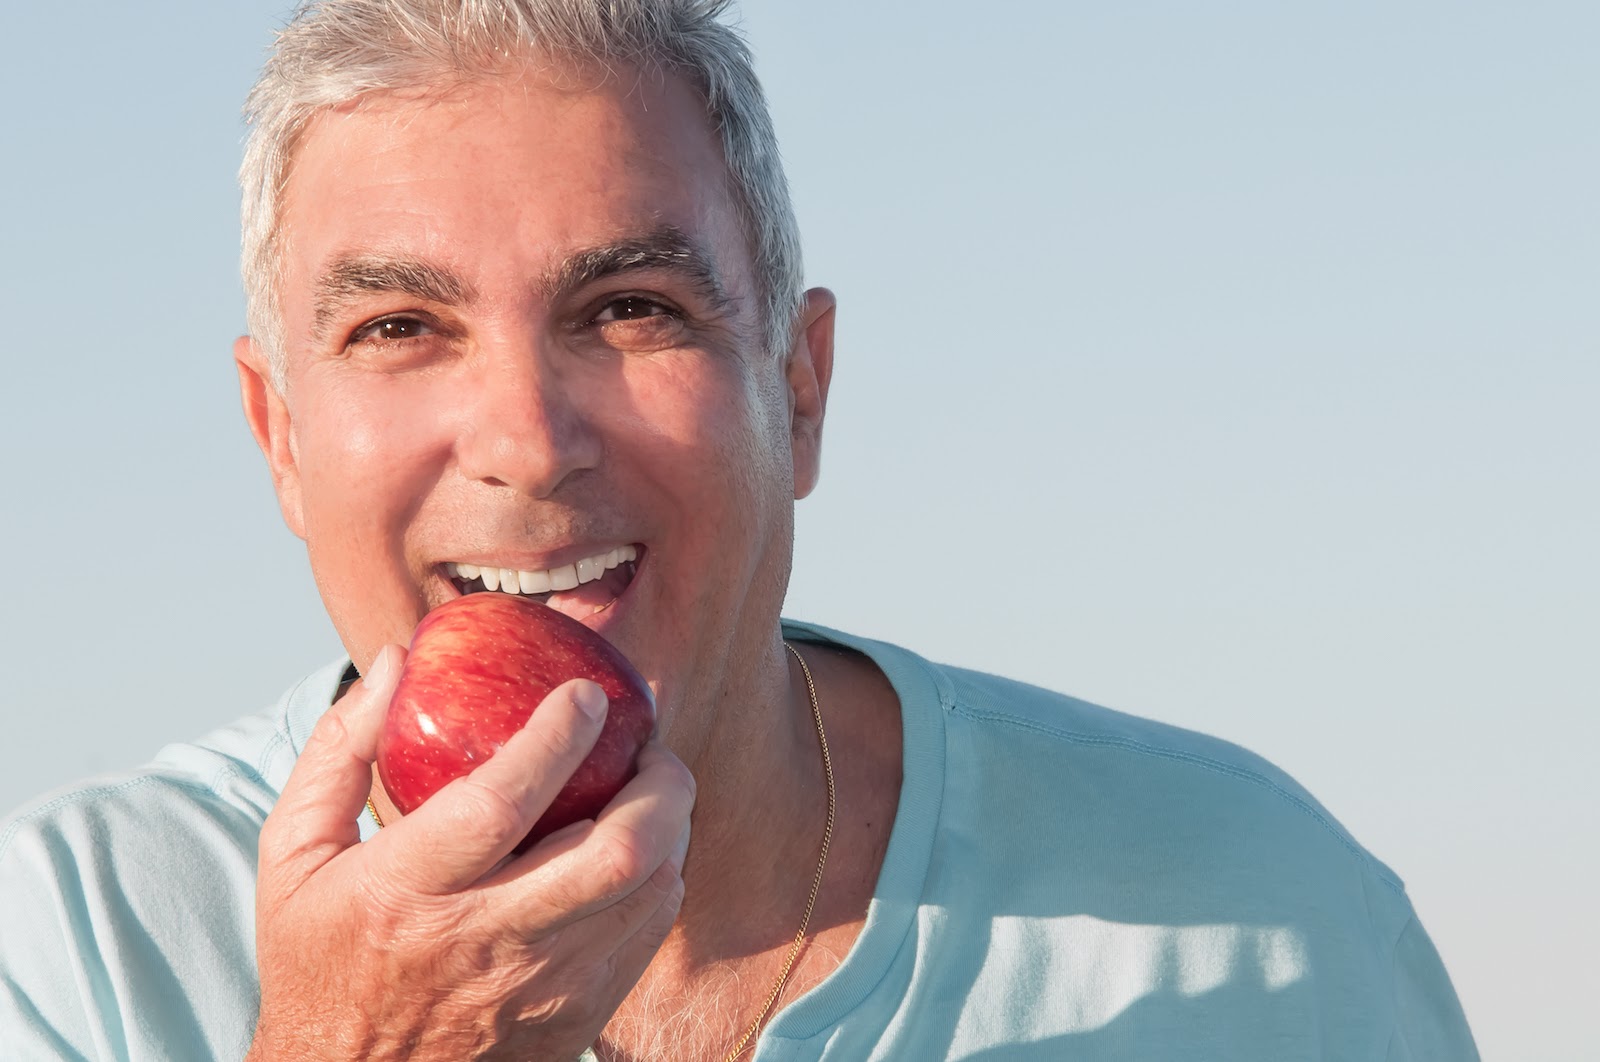 Top Clinics for Dentures in Caldwell, ID